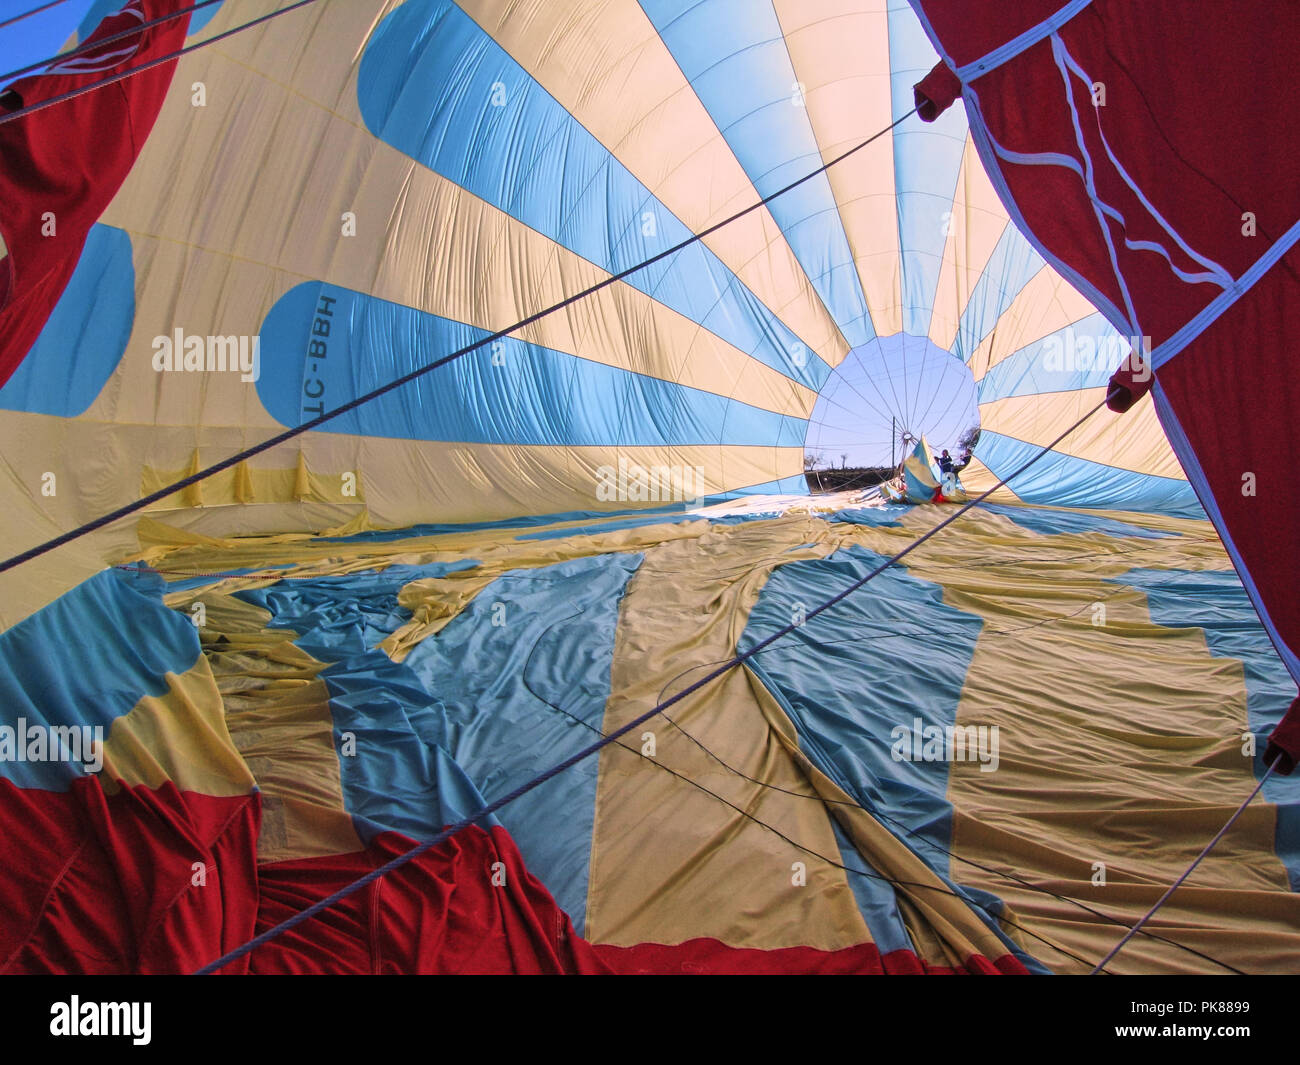 Inside a hot air balloon in Goreme Cappadocia being taken down after an early morning flight Stock Photo